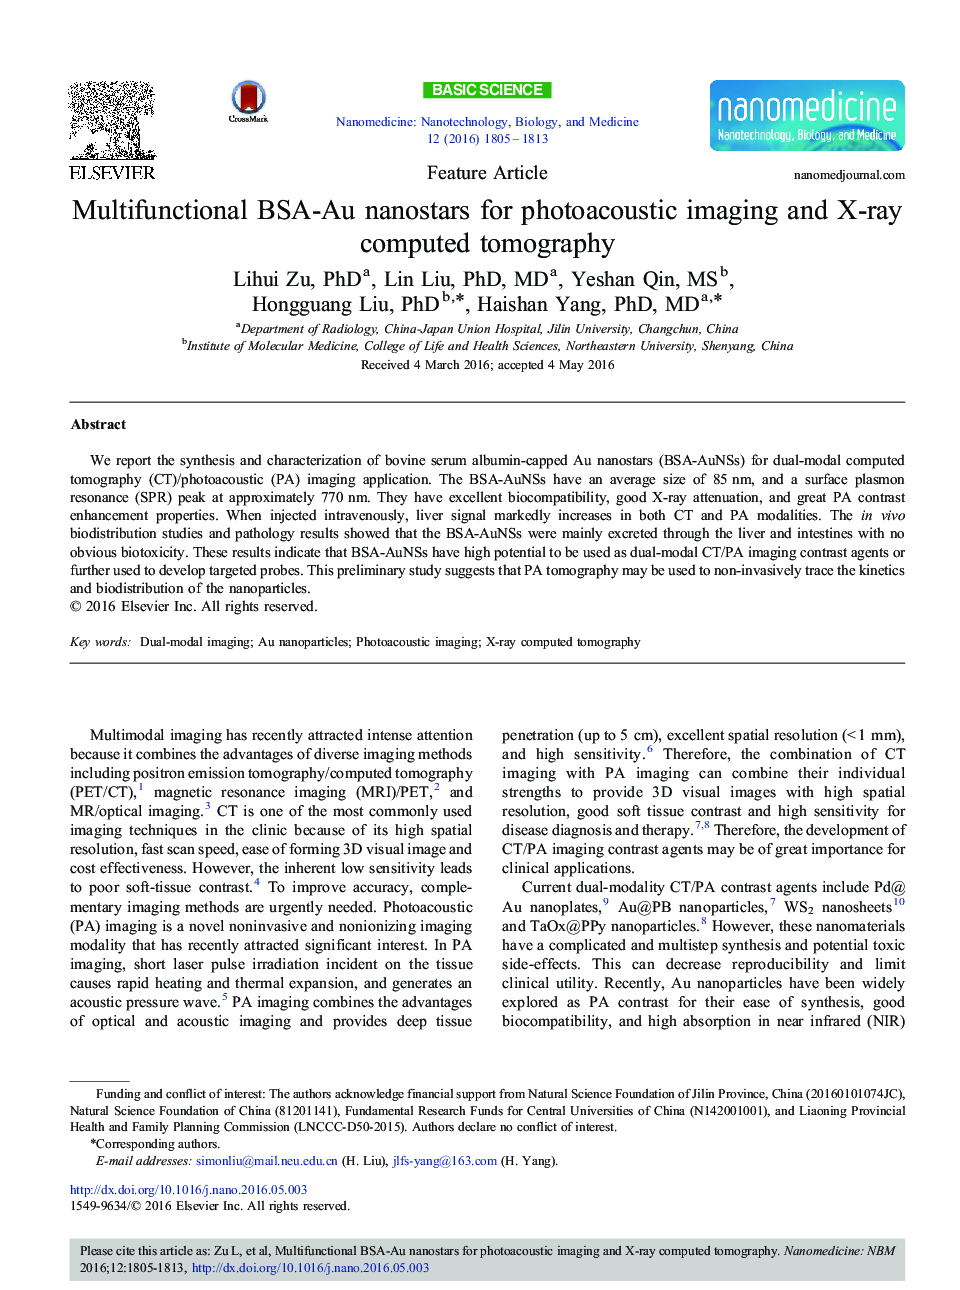 Multifunctional BSA-Au nanostars for photoacoustic imaging and X-ray computed tomography